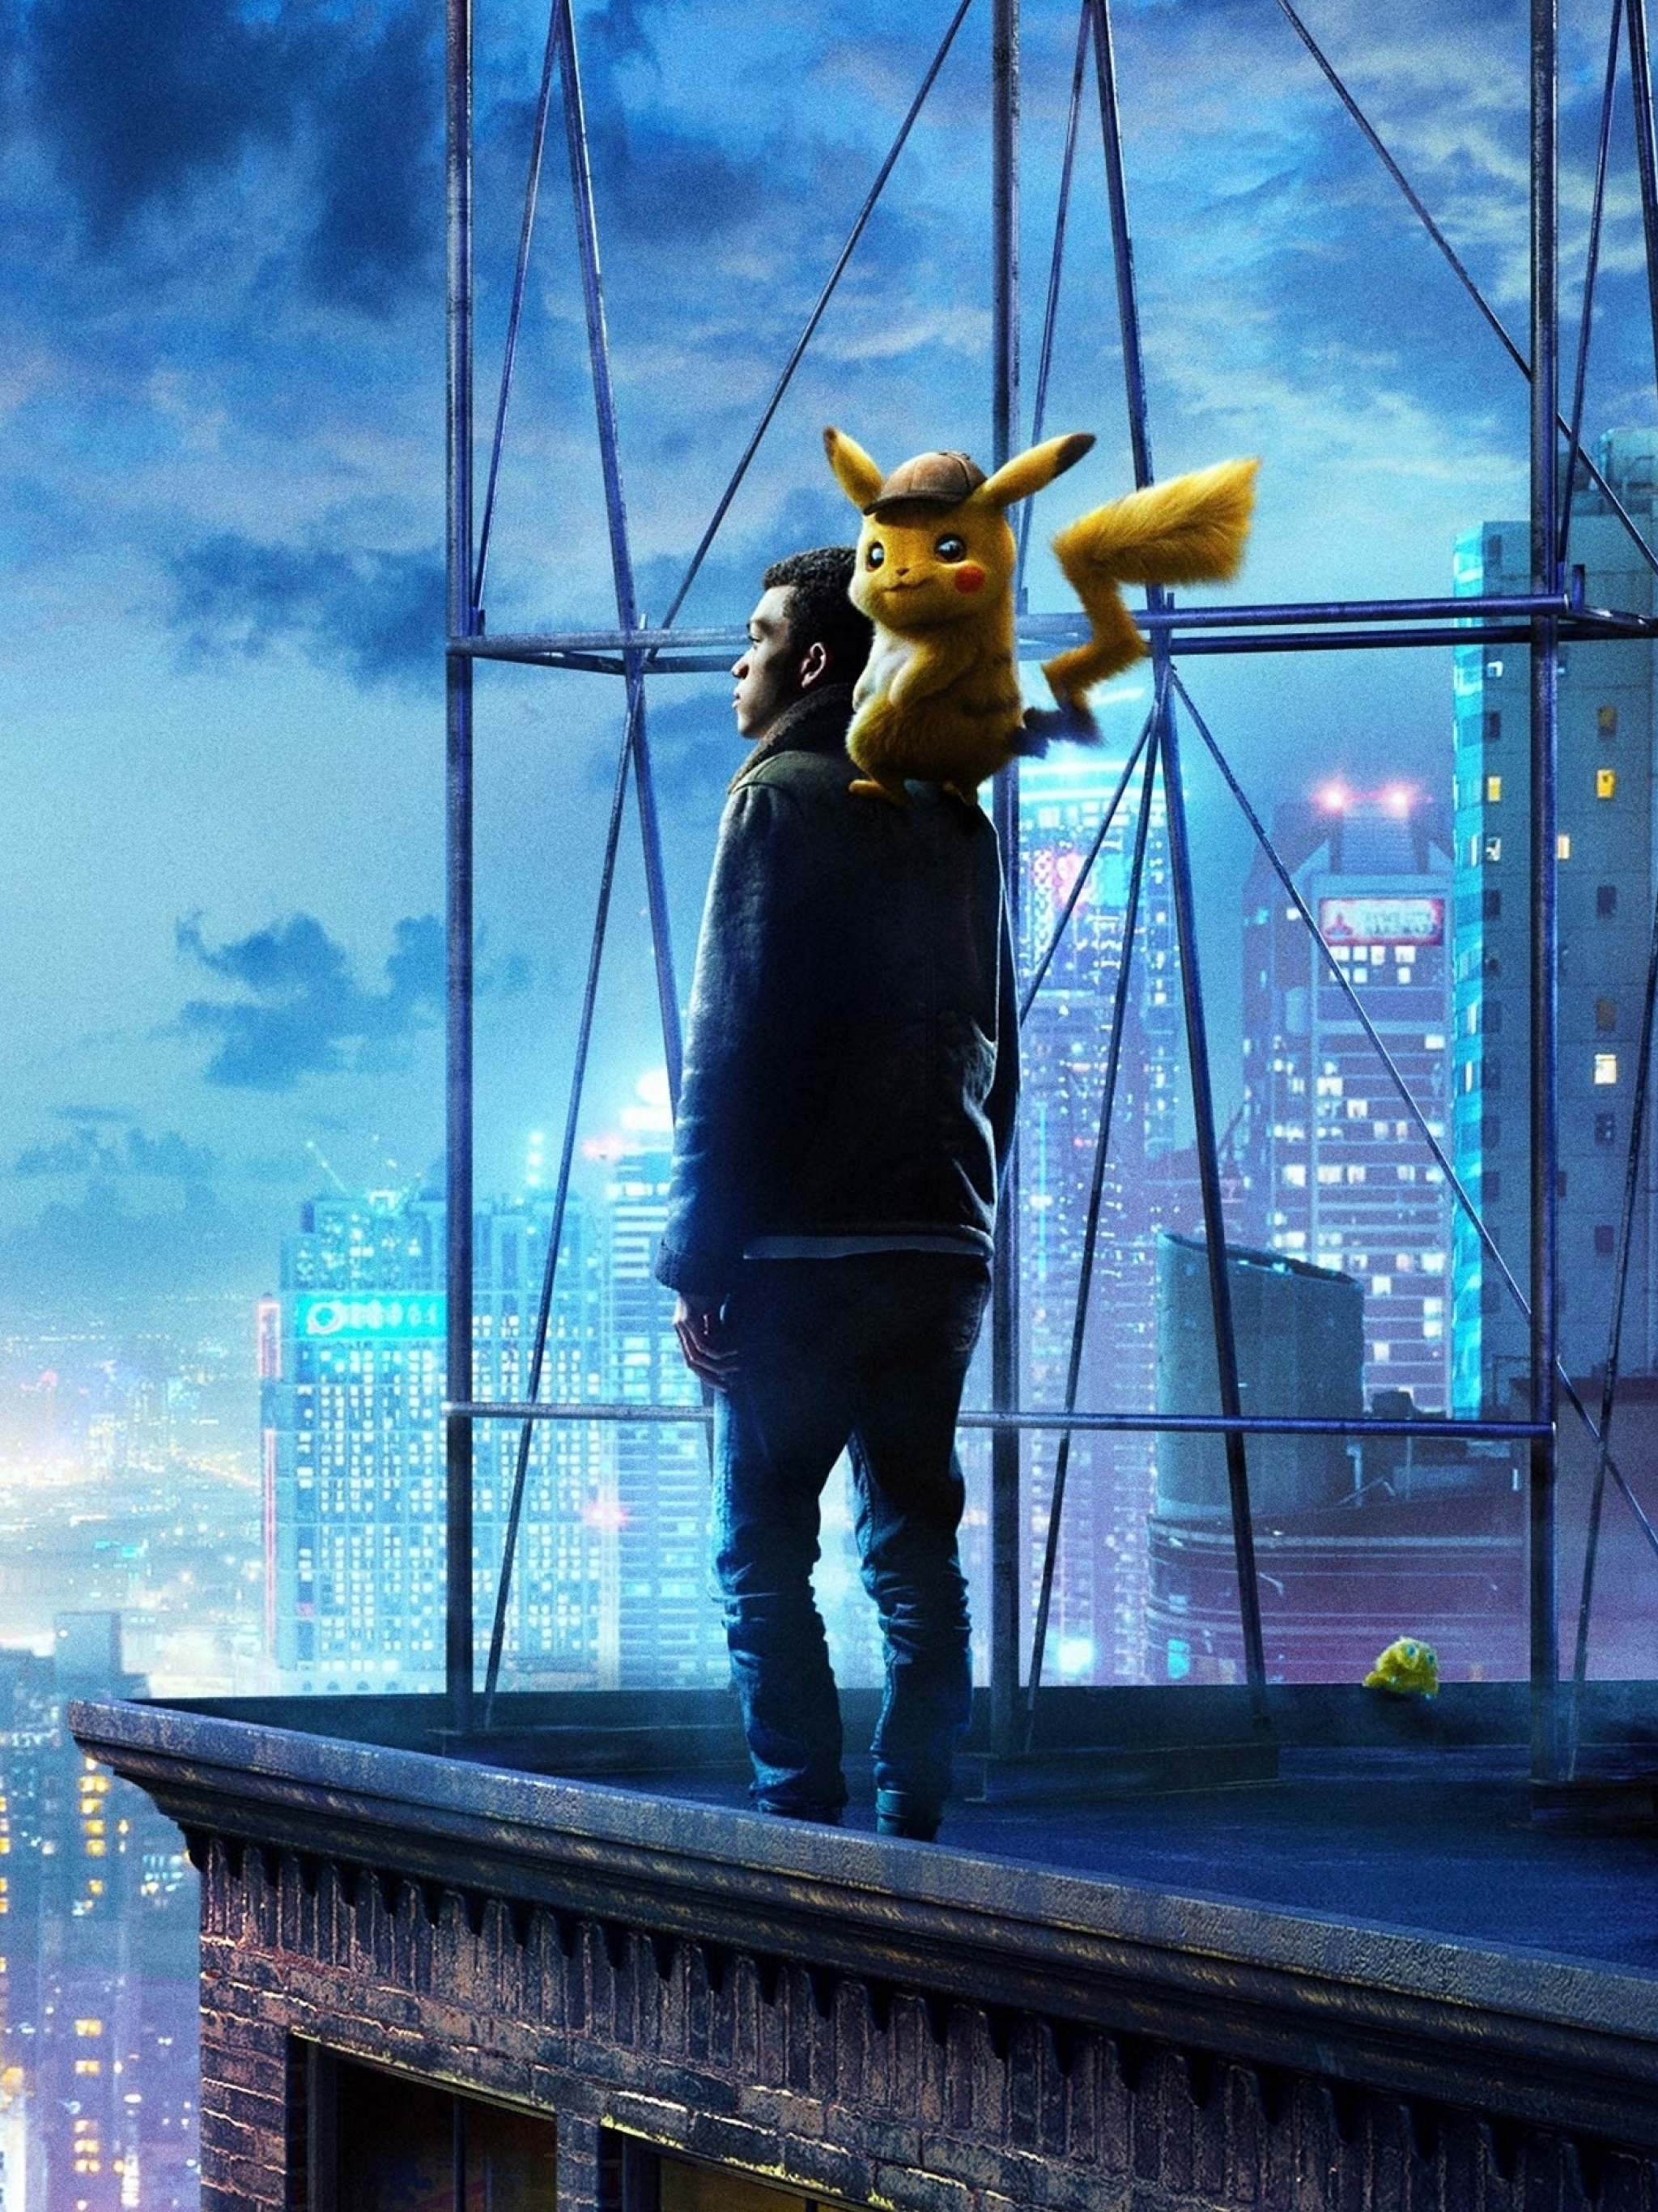 48x2732 Pokemon Detective Pikachu 19 Movie 48x2732 Resolution Wallpaper Hd Movies 4k Wallpapers Images Photos And Background Wallpapers Den